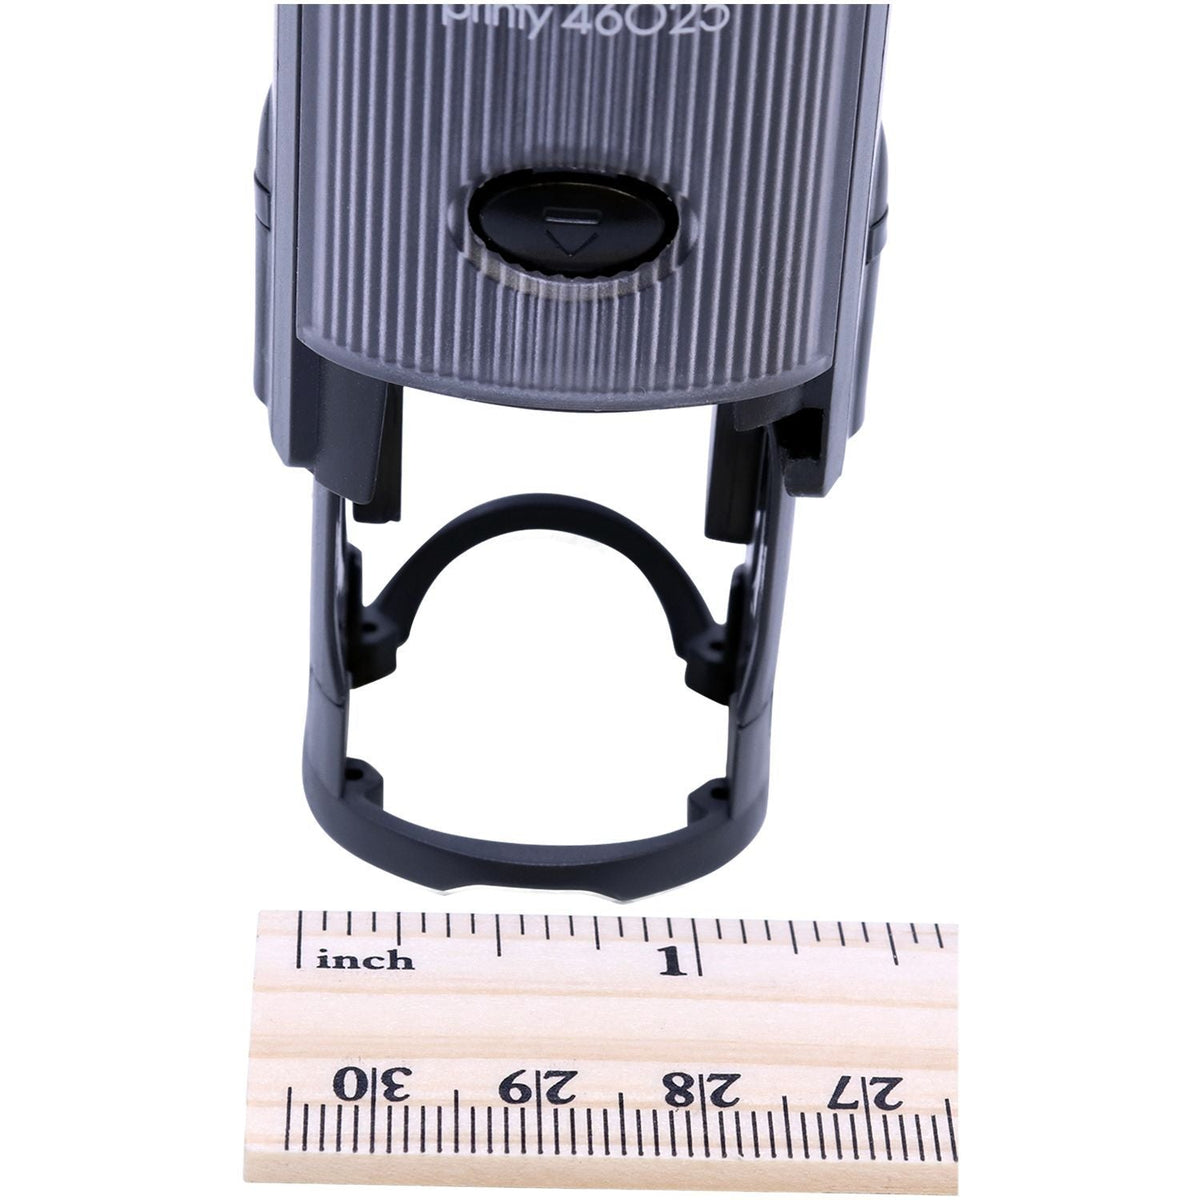 Measurment of Self-Inking Round Arrow Stamp with Ruler